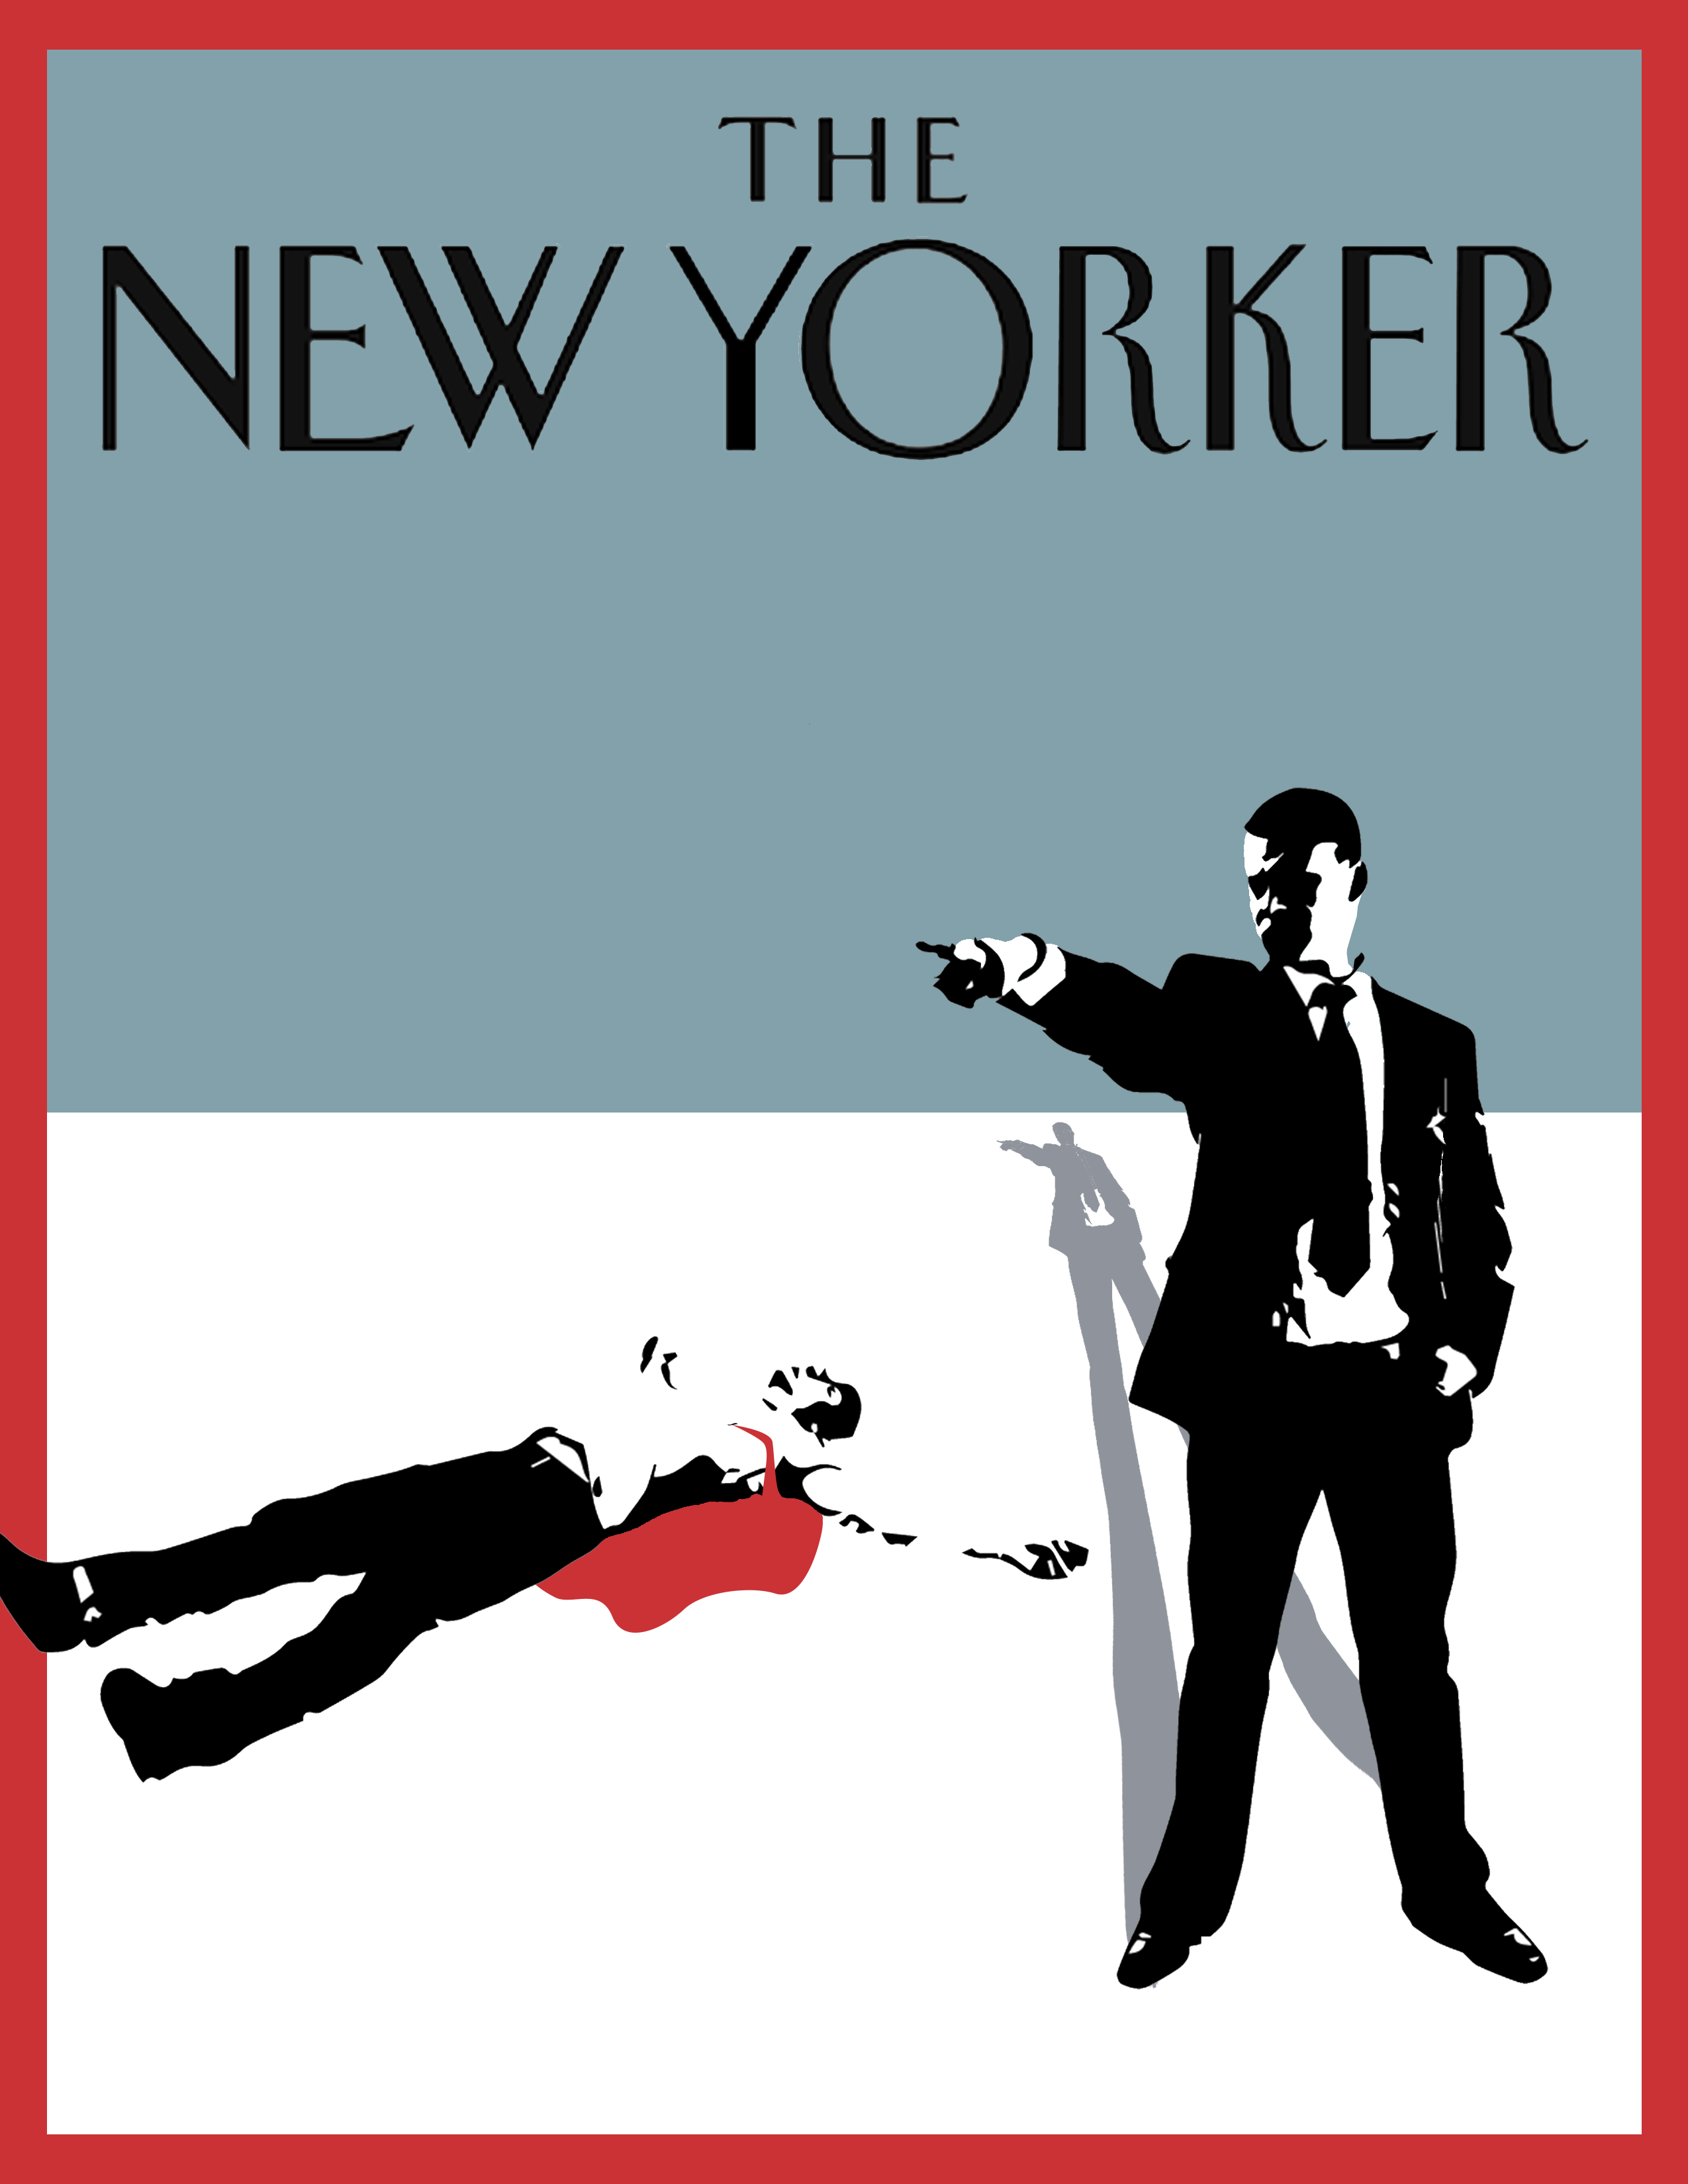 Int. Seminar 2–New Yorker Covers and Response